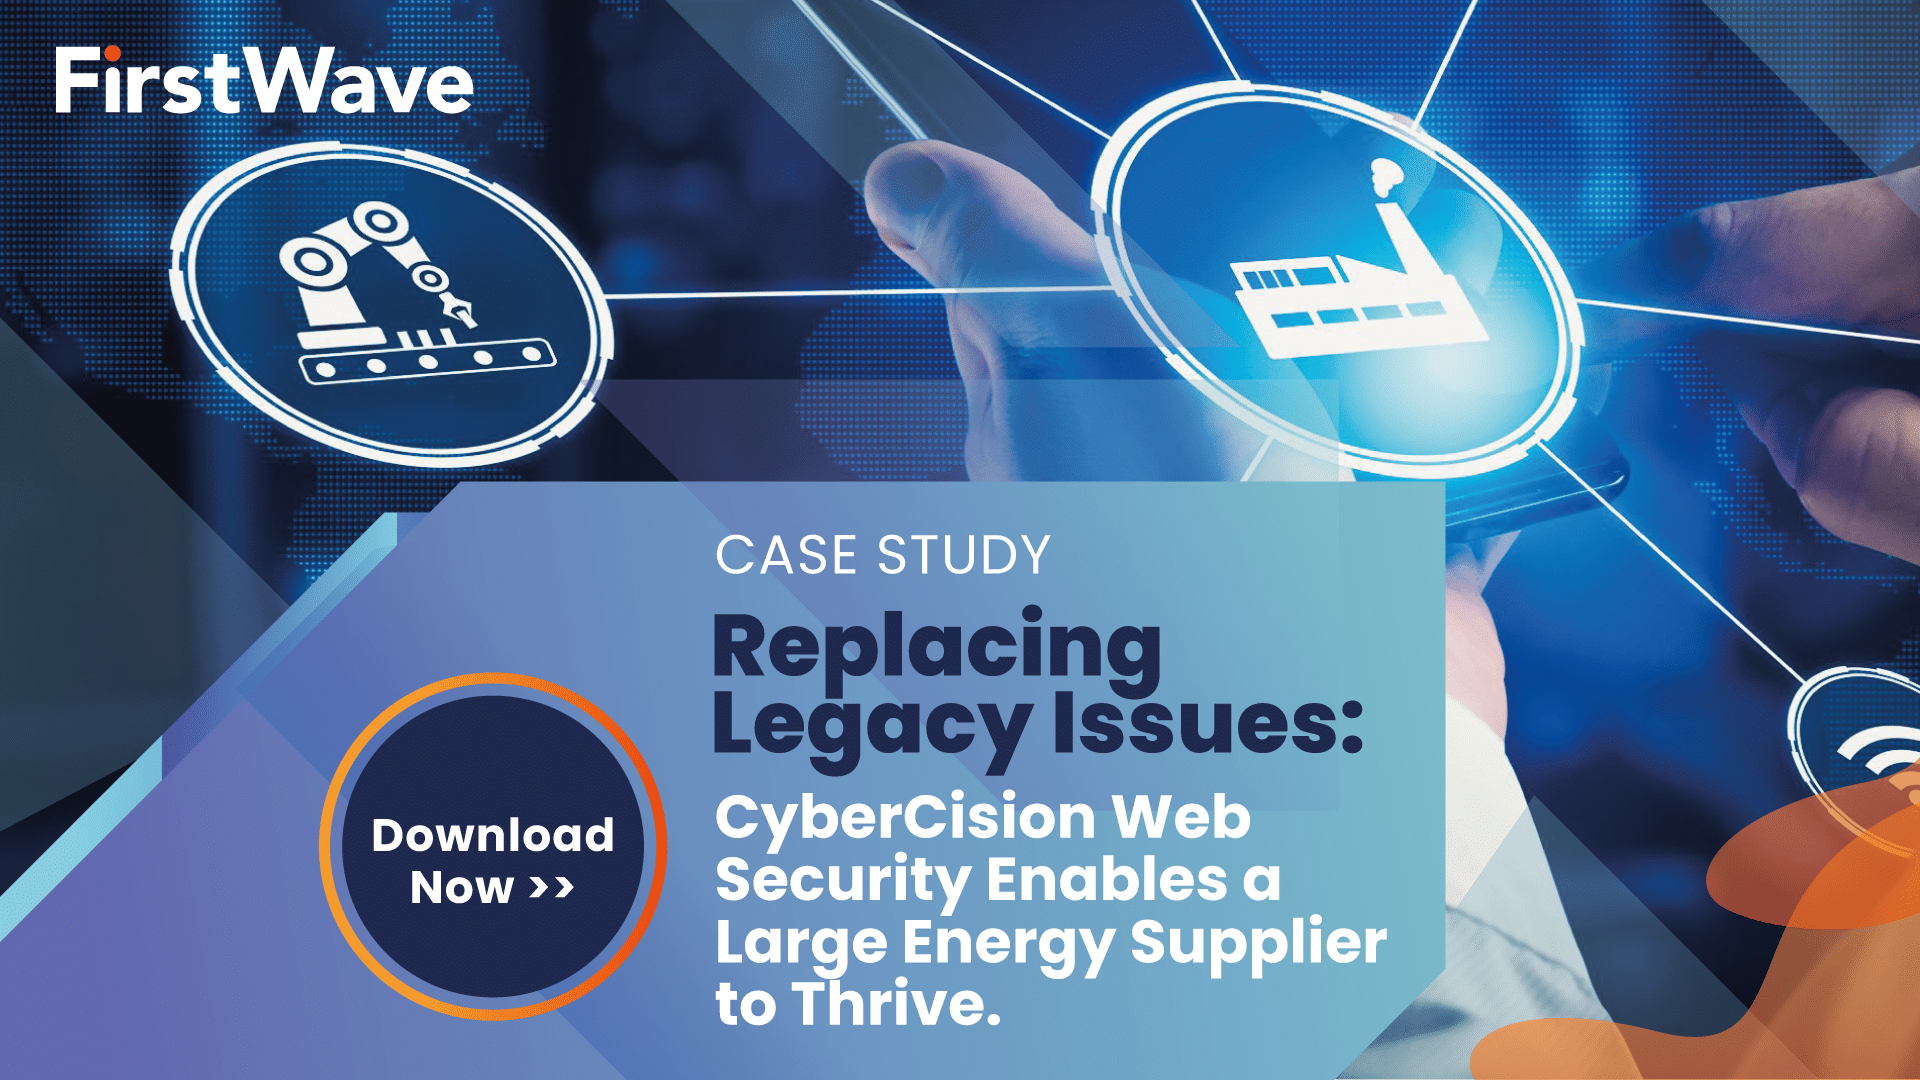 Large Energy Supplier Ensures Bright Future with CyberCision Web Security